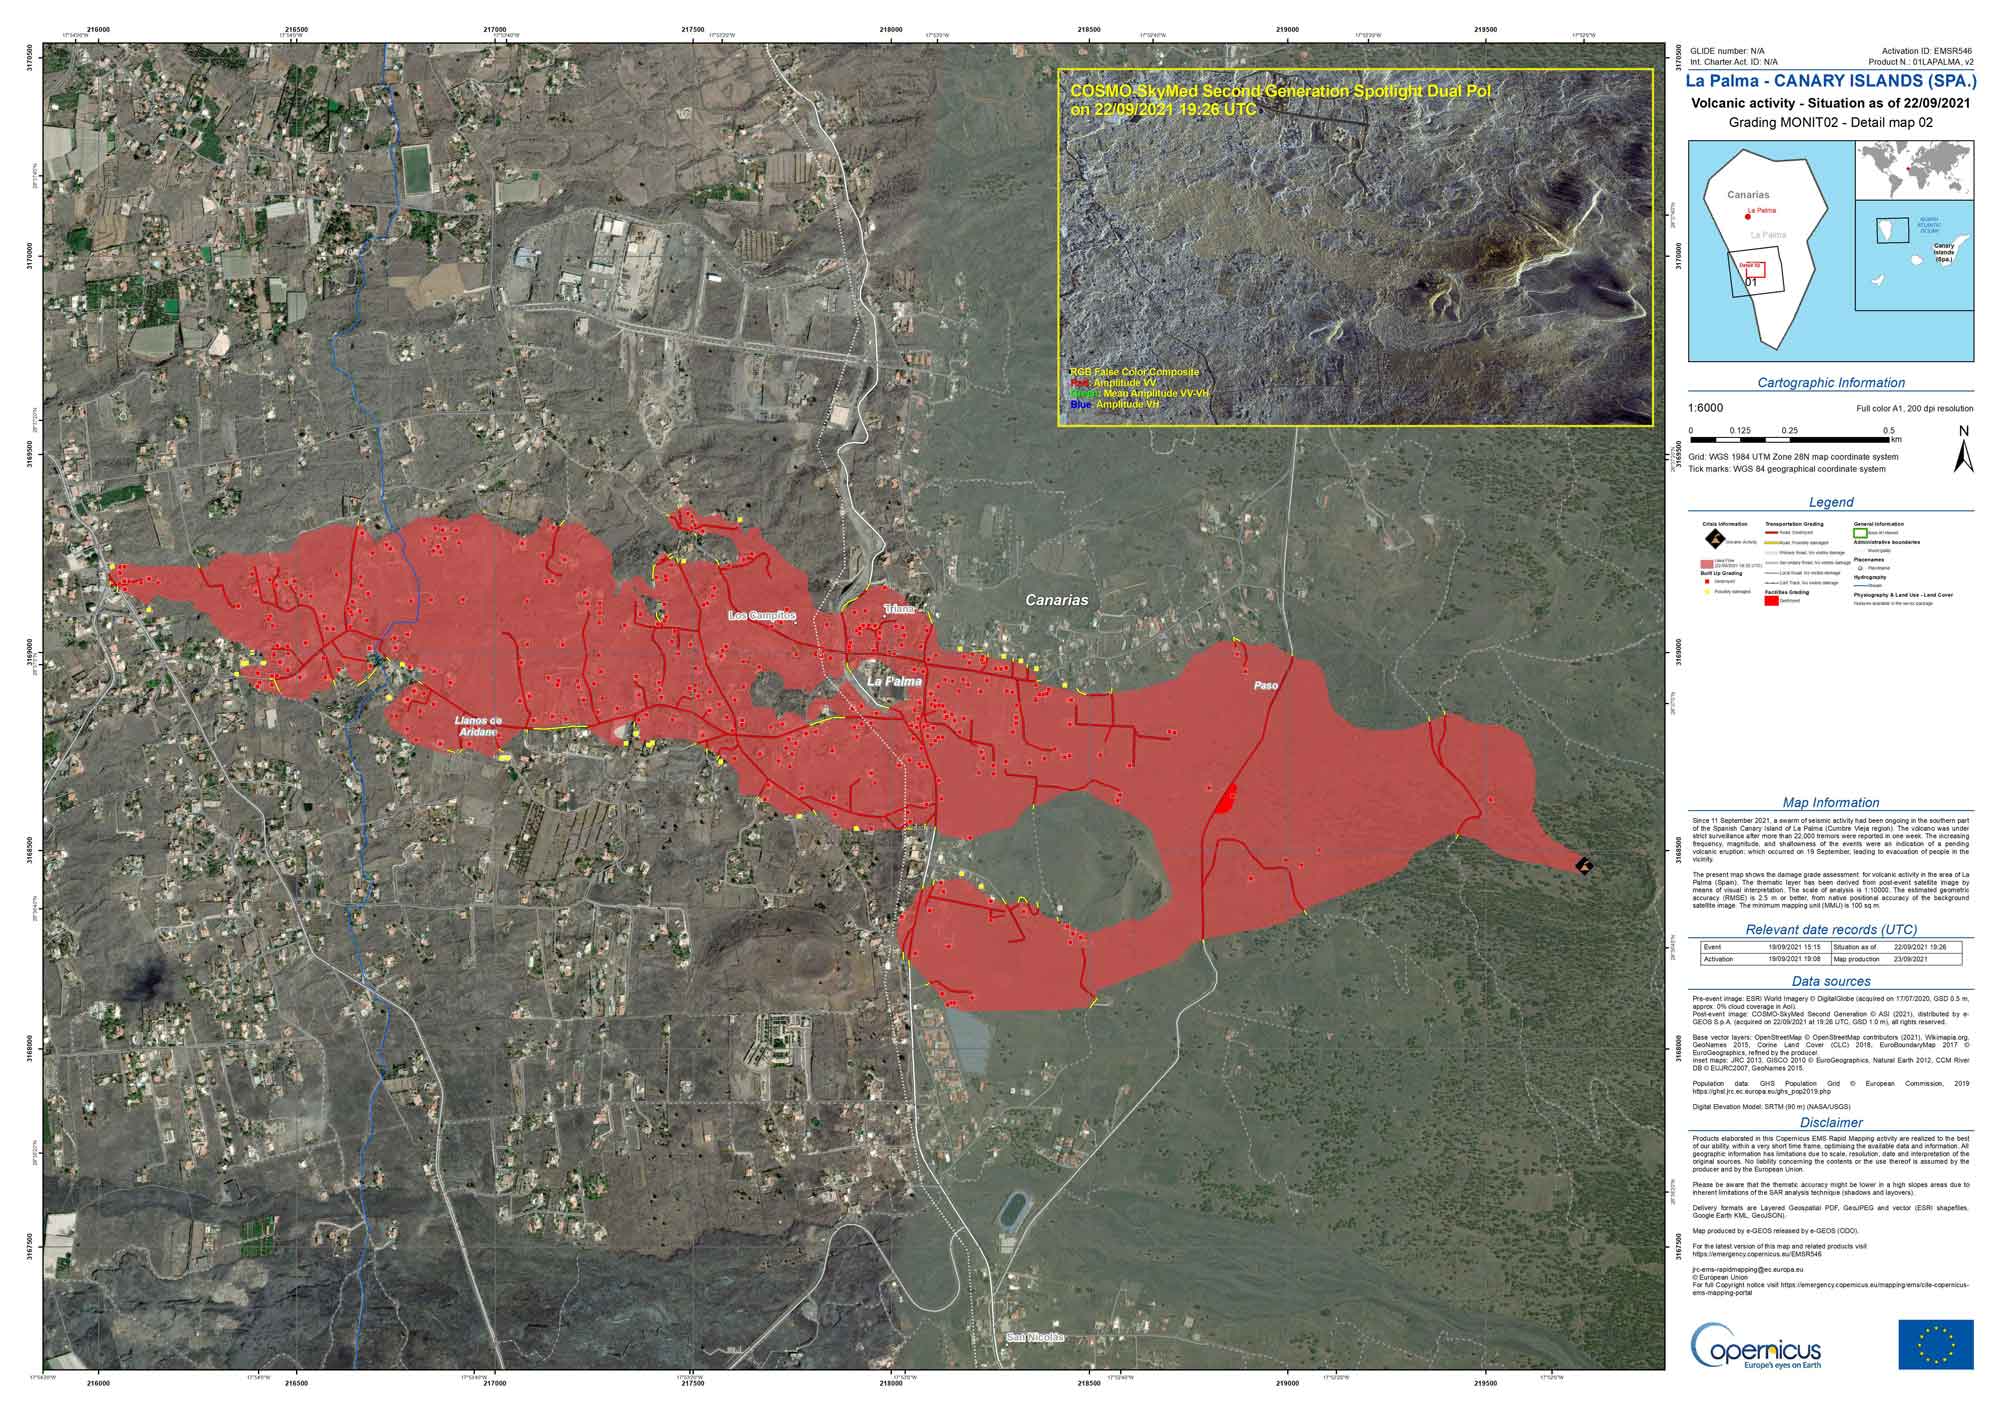 Area covered by lava flows as of this morning (image: Copernicus)